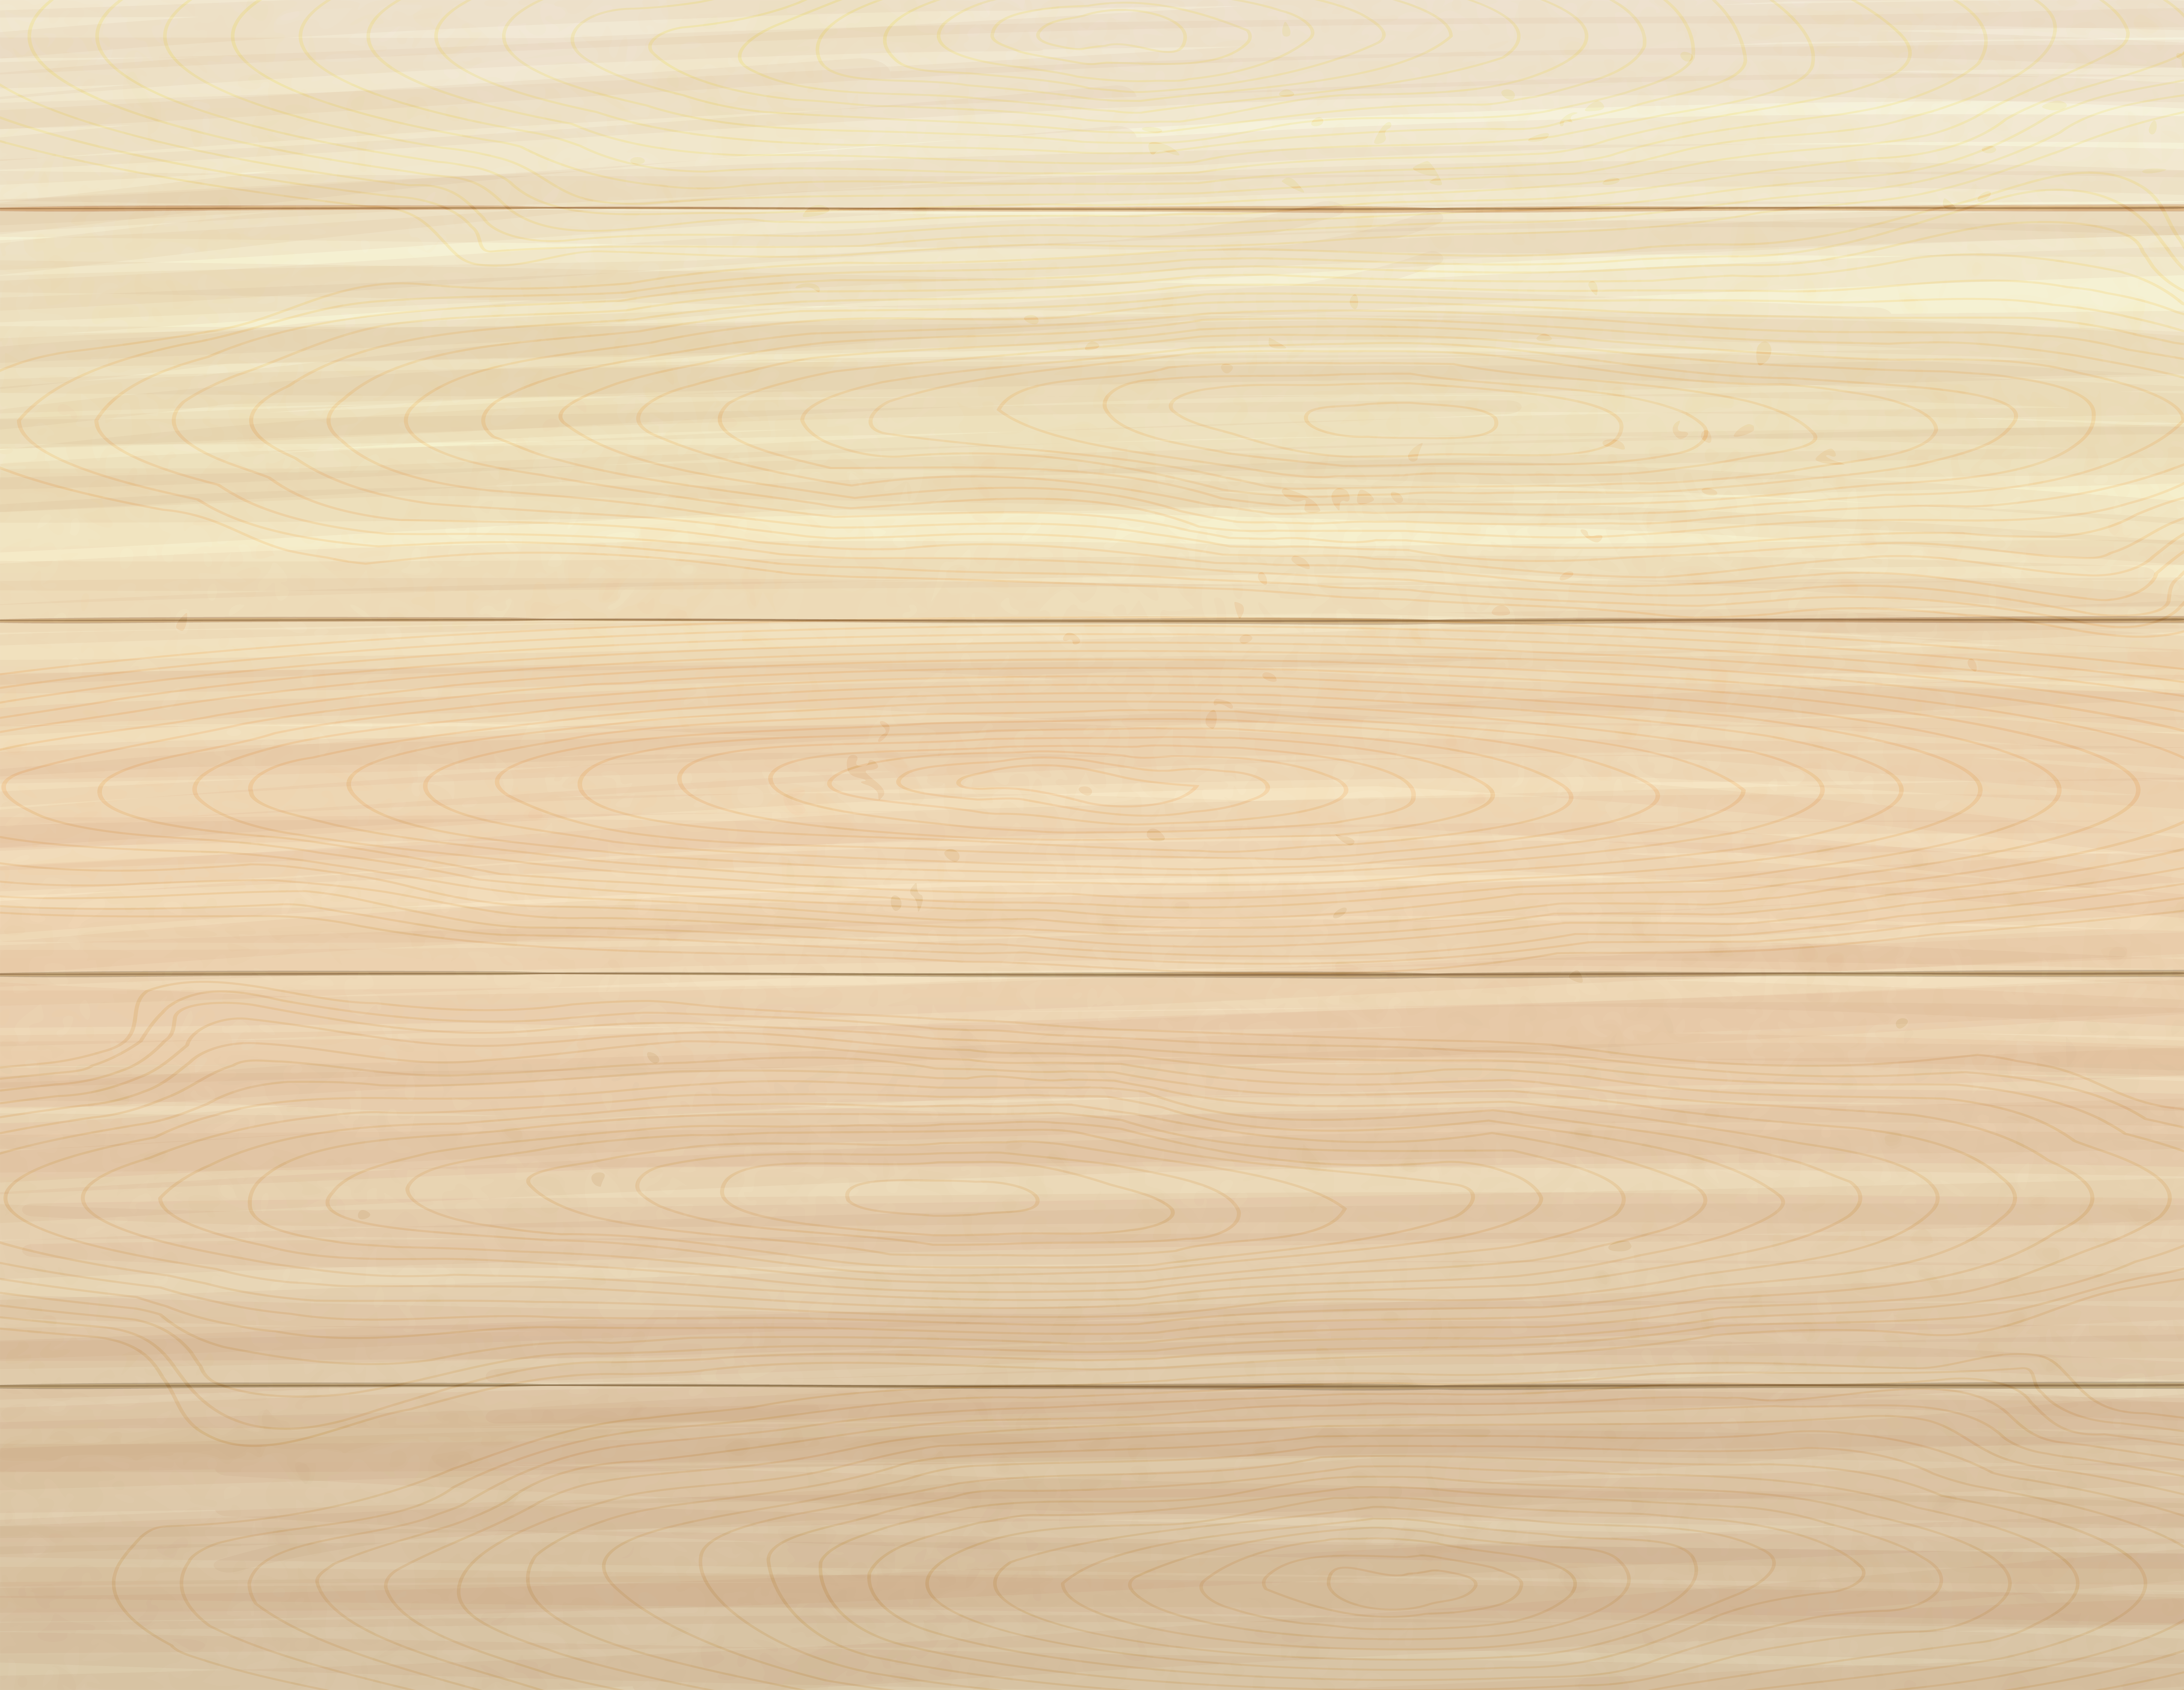 Light Wooden Background | Gallery Yopriceville - High-Quality Images